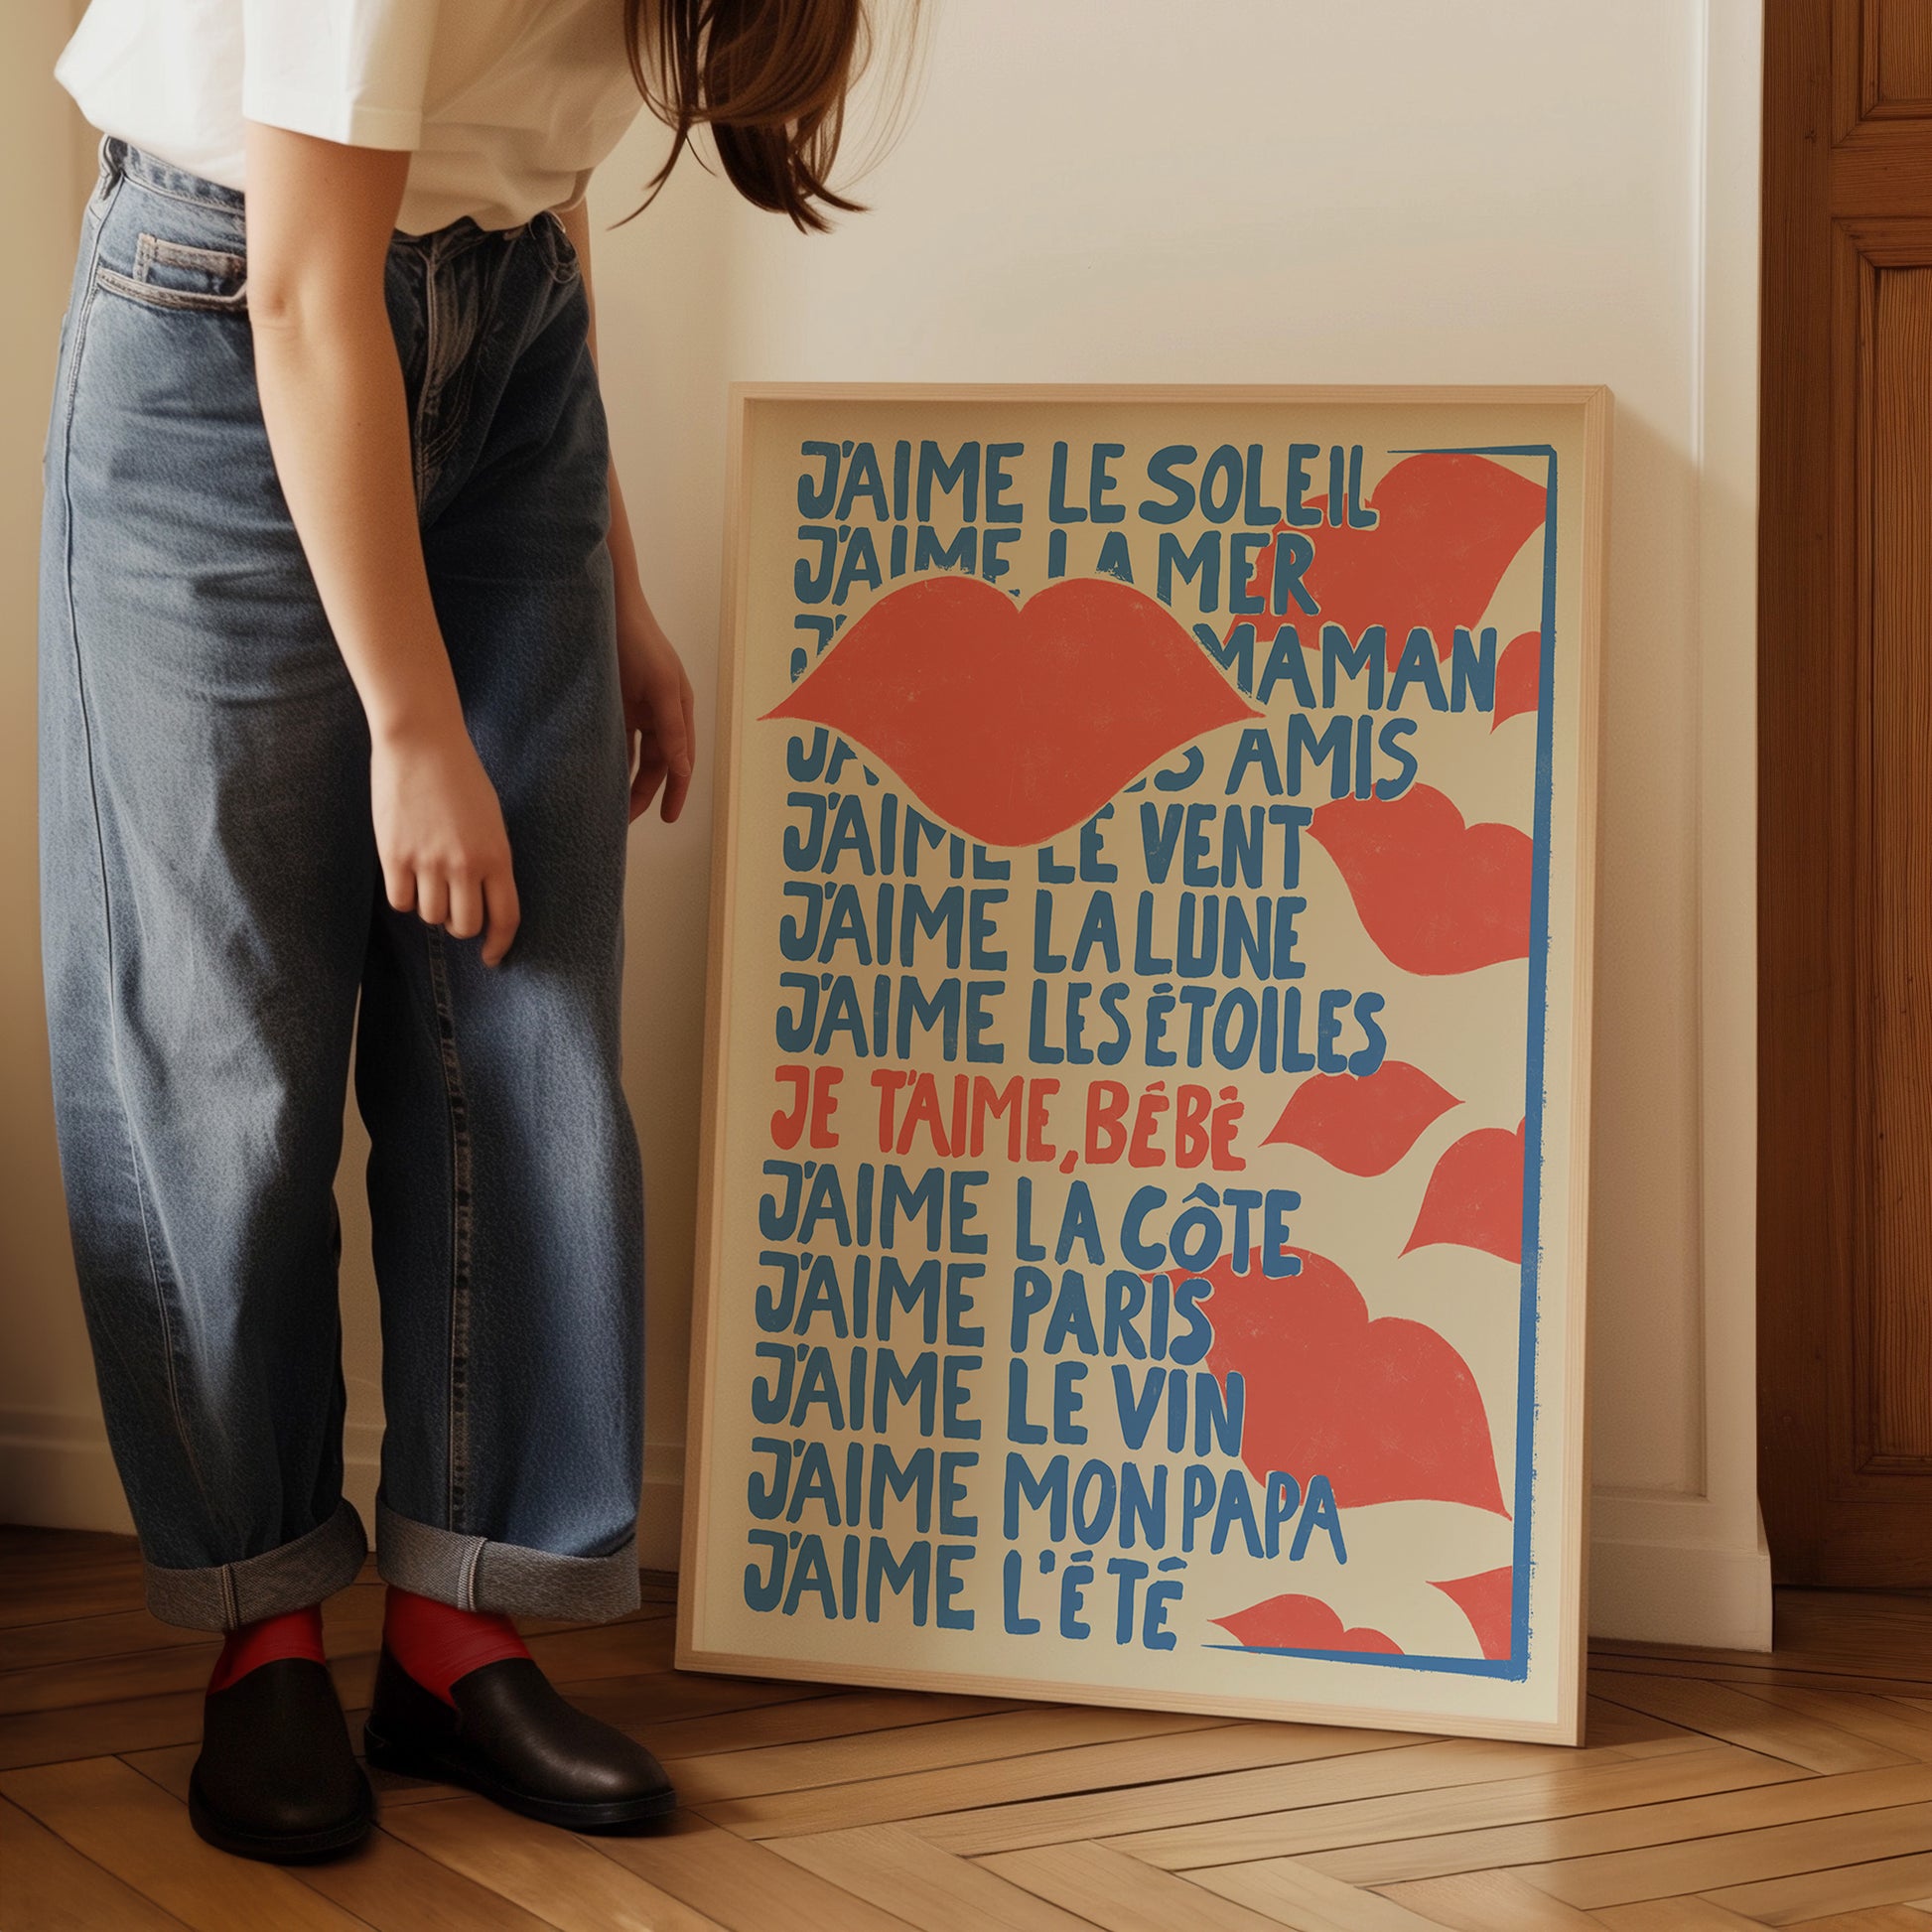 a woman standing next to a poster on a wooden floor